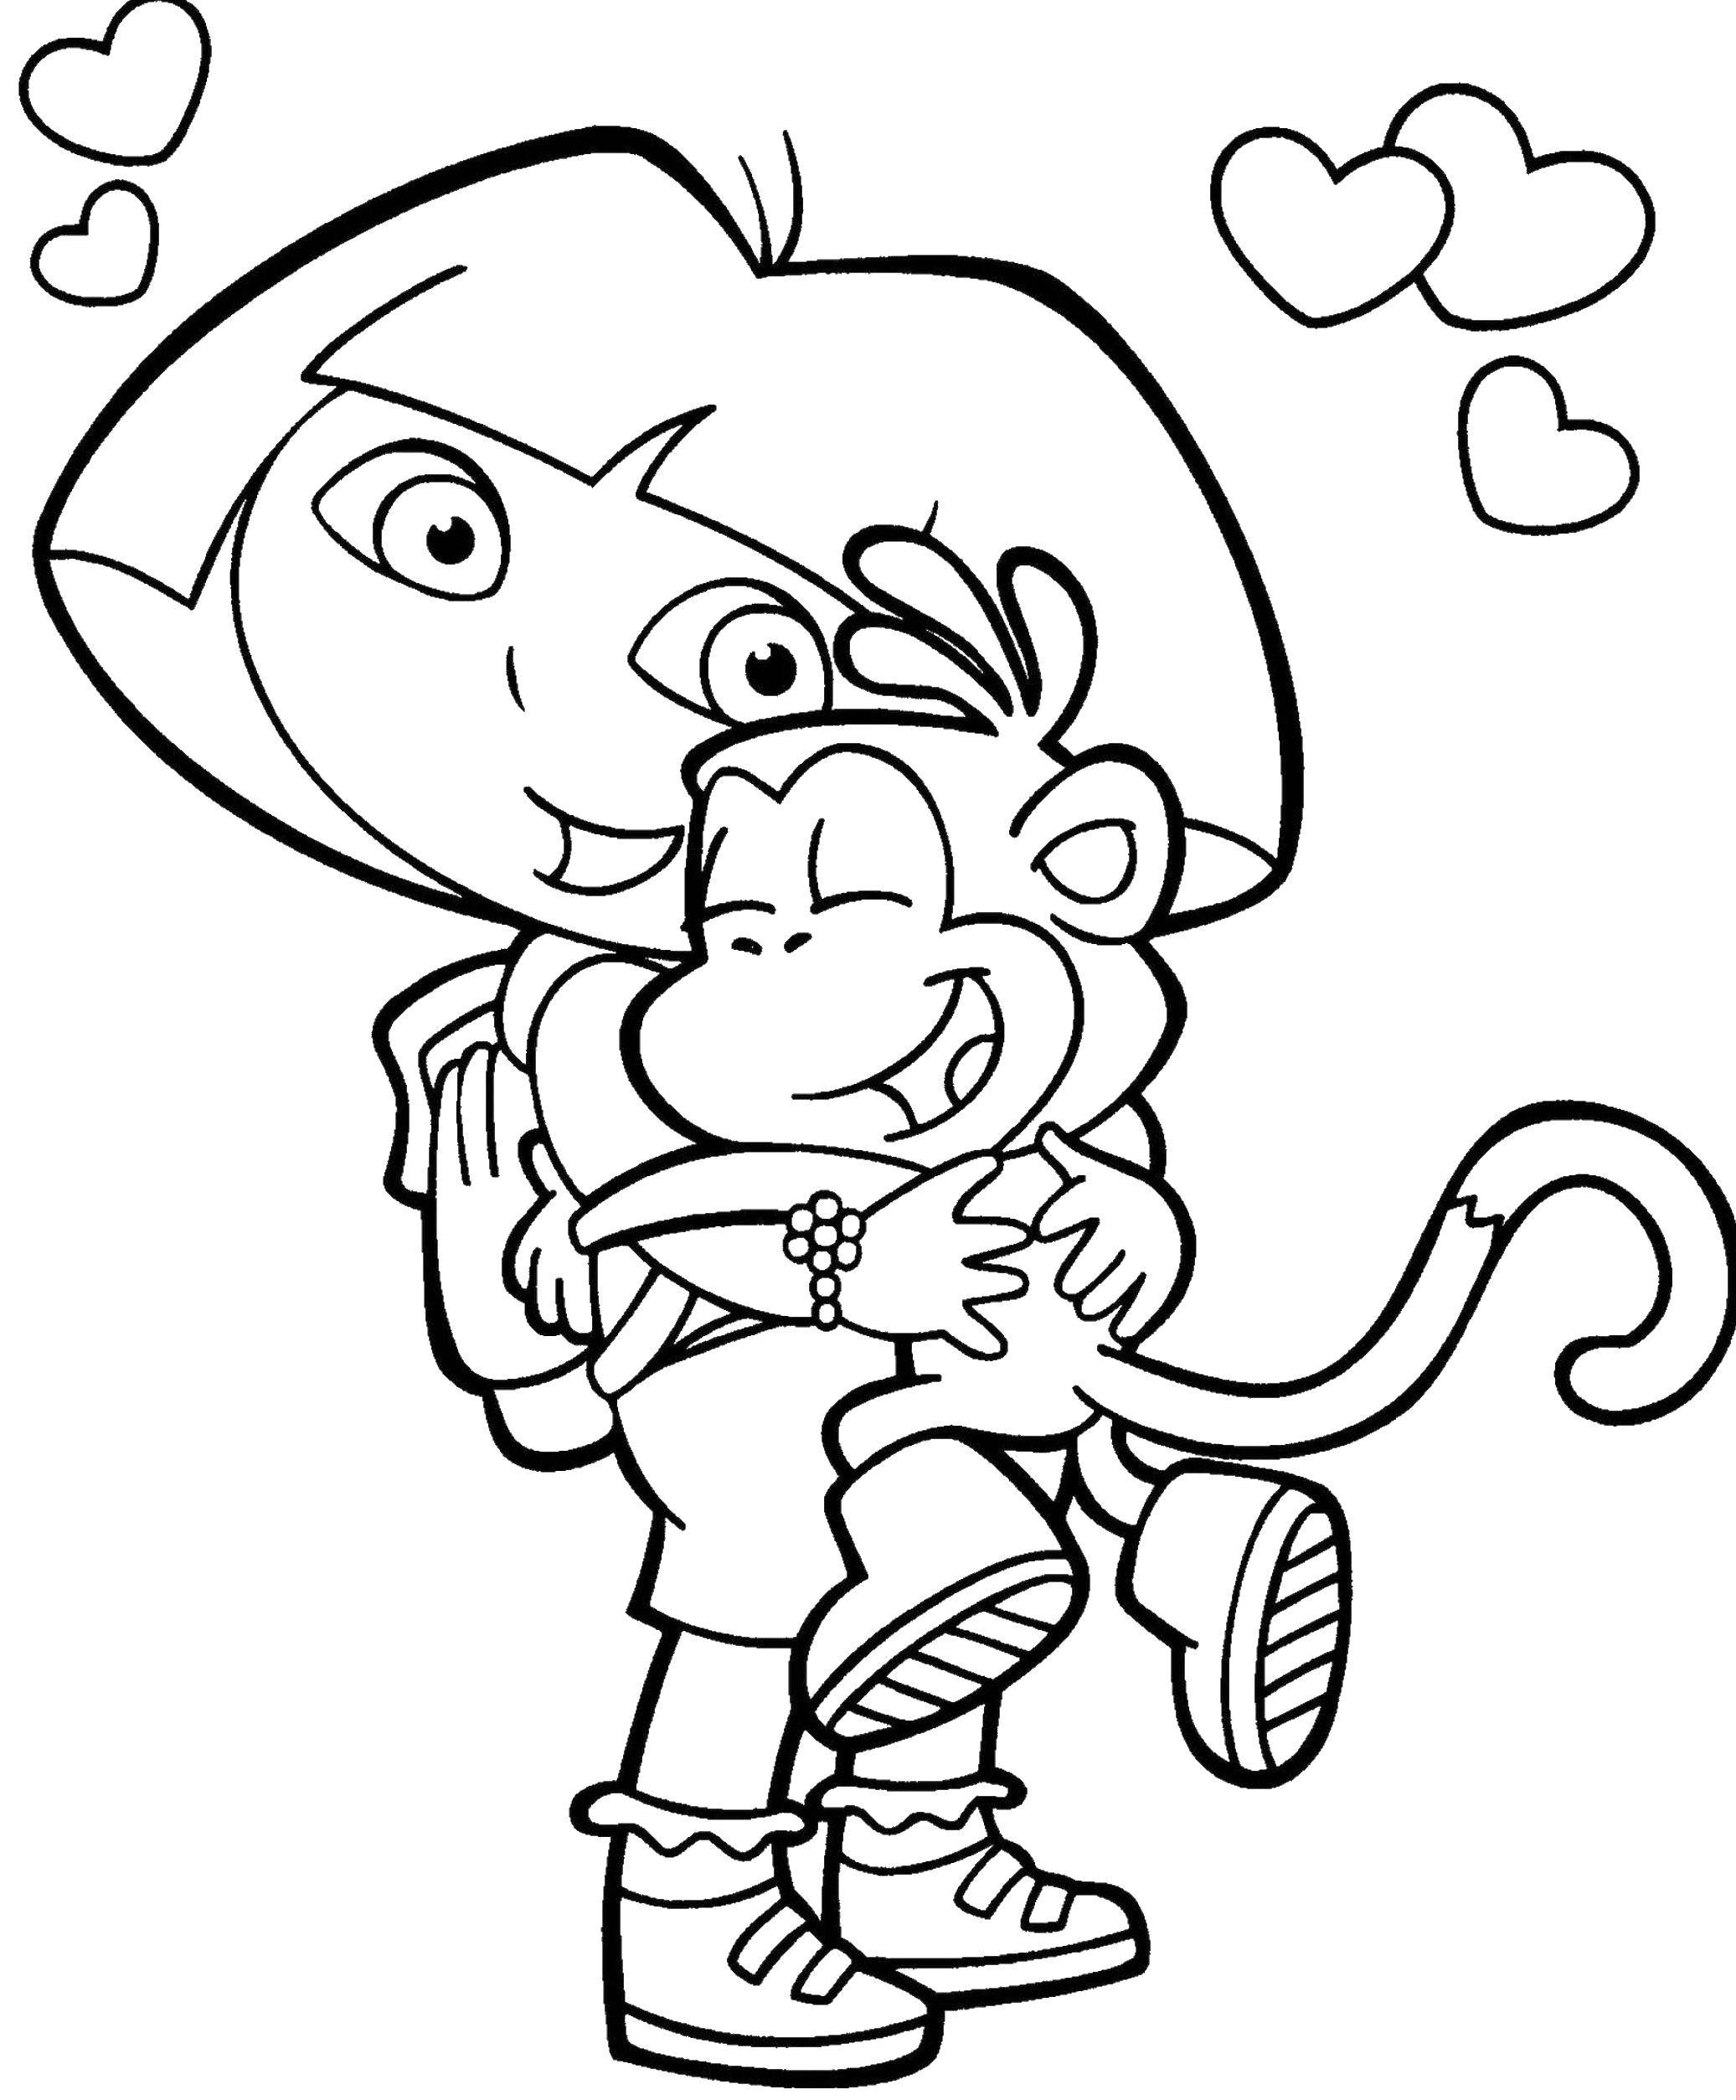 Coloring Dasha traveler and slipper. Category cartoons. Tags:  the cartoons , Dasha traveler, Slipper.